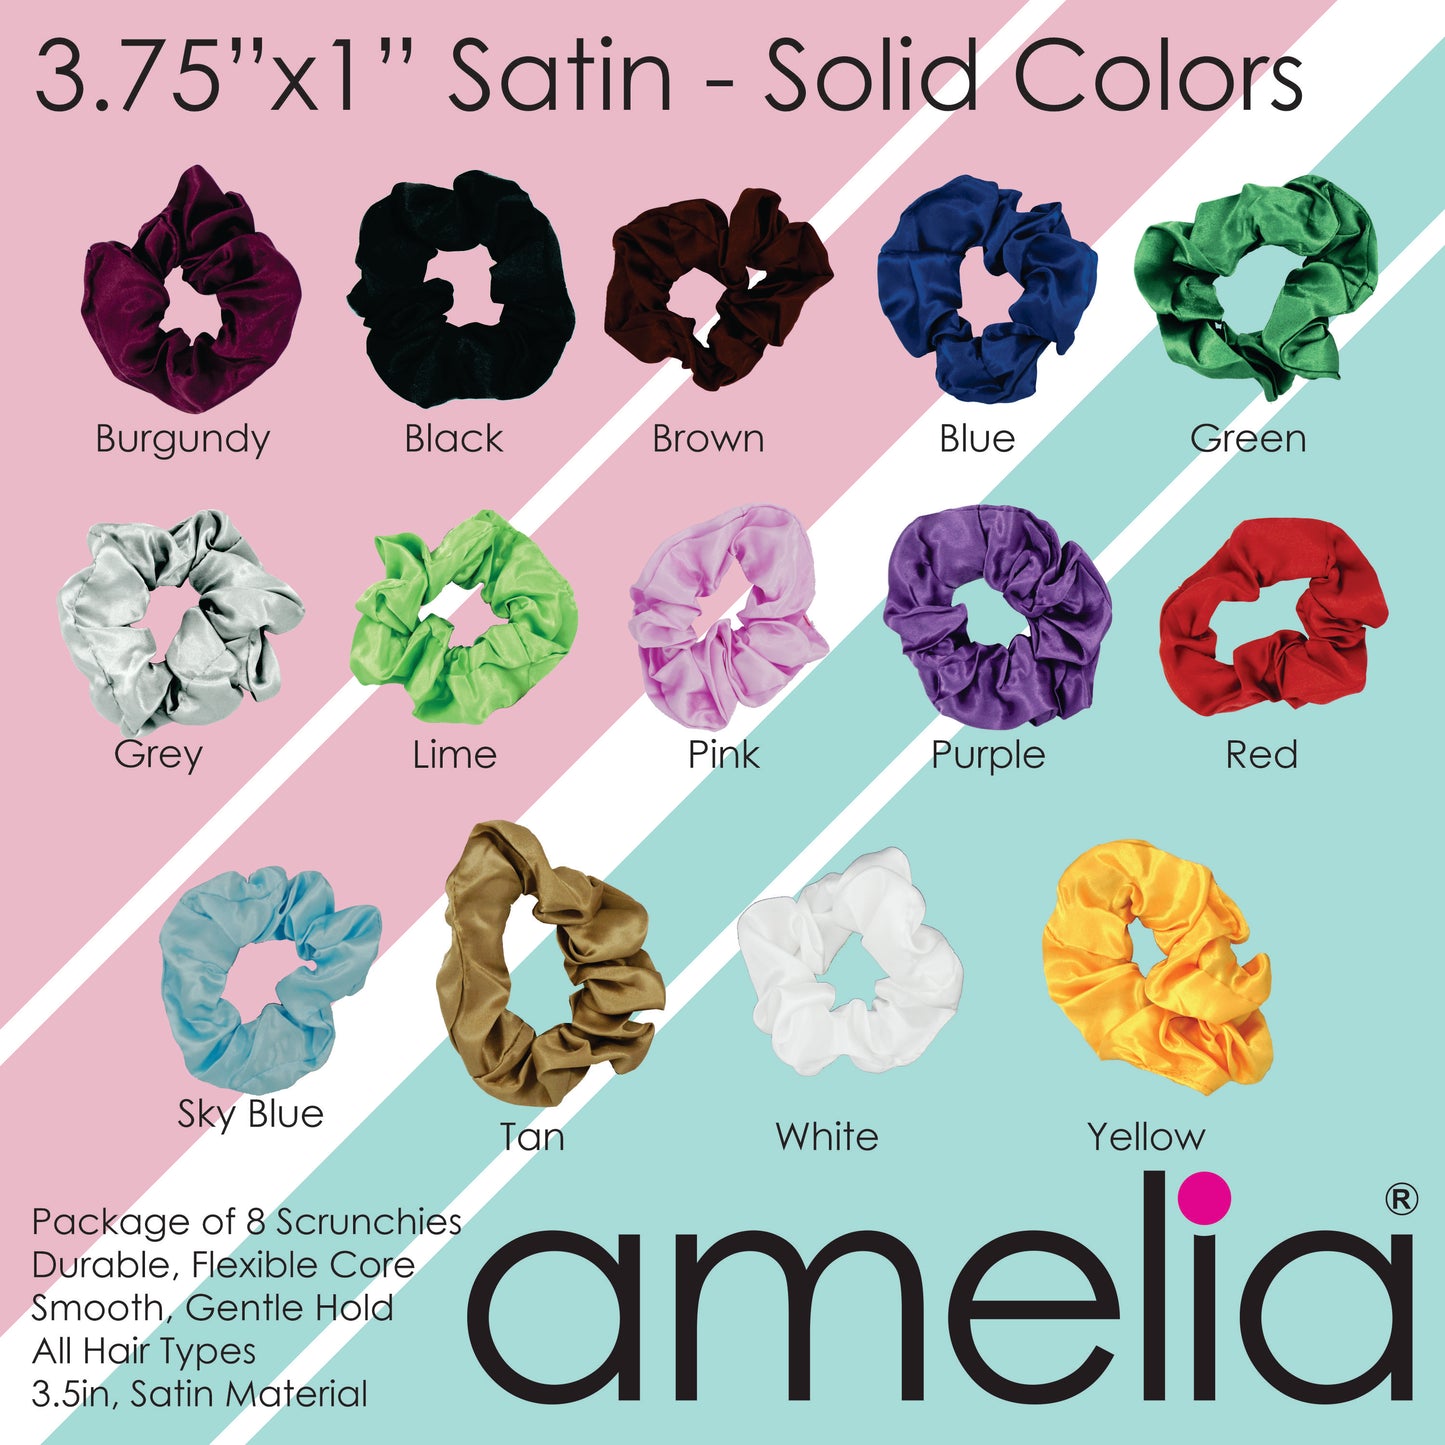 Amelia Beauty Products, Purple Satin Scrunchies, 3.5in Diameter, Gentle on Hair, Strong Hold, No Snag, No Dents or Creases. 8 Pack